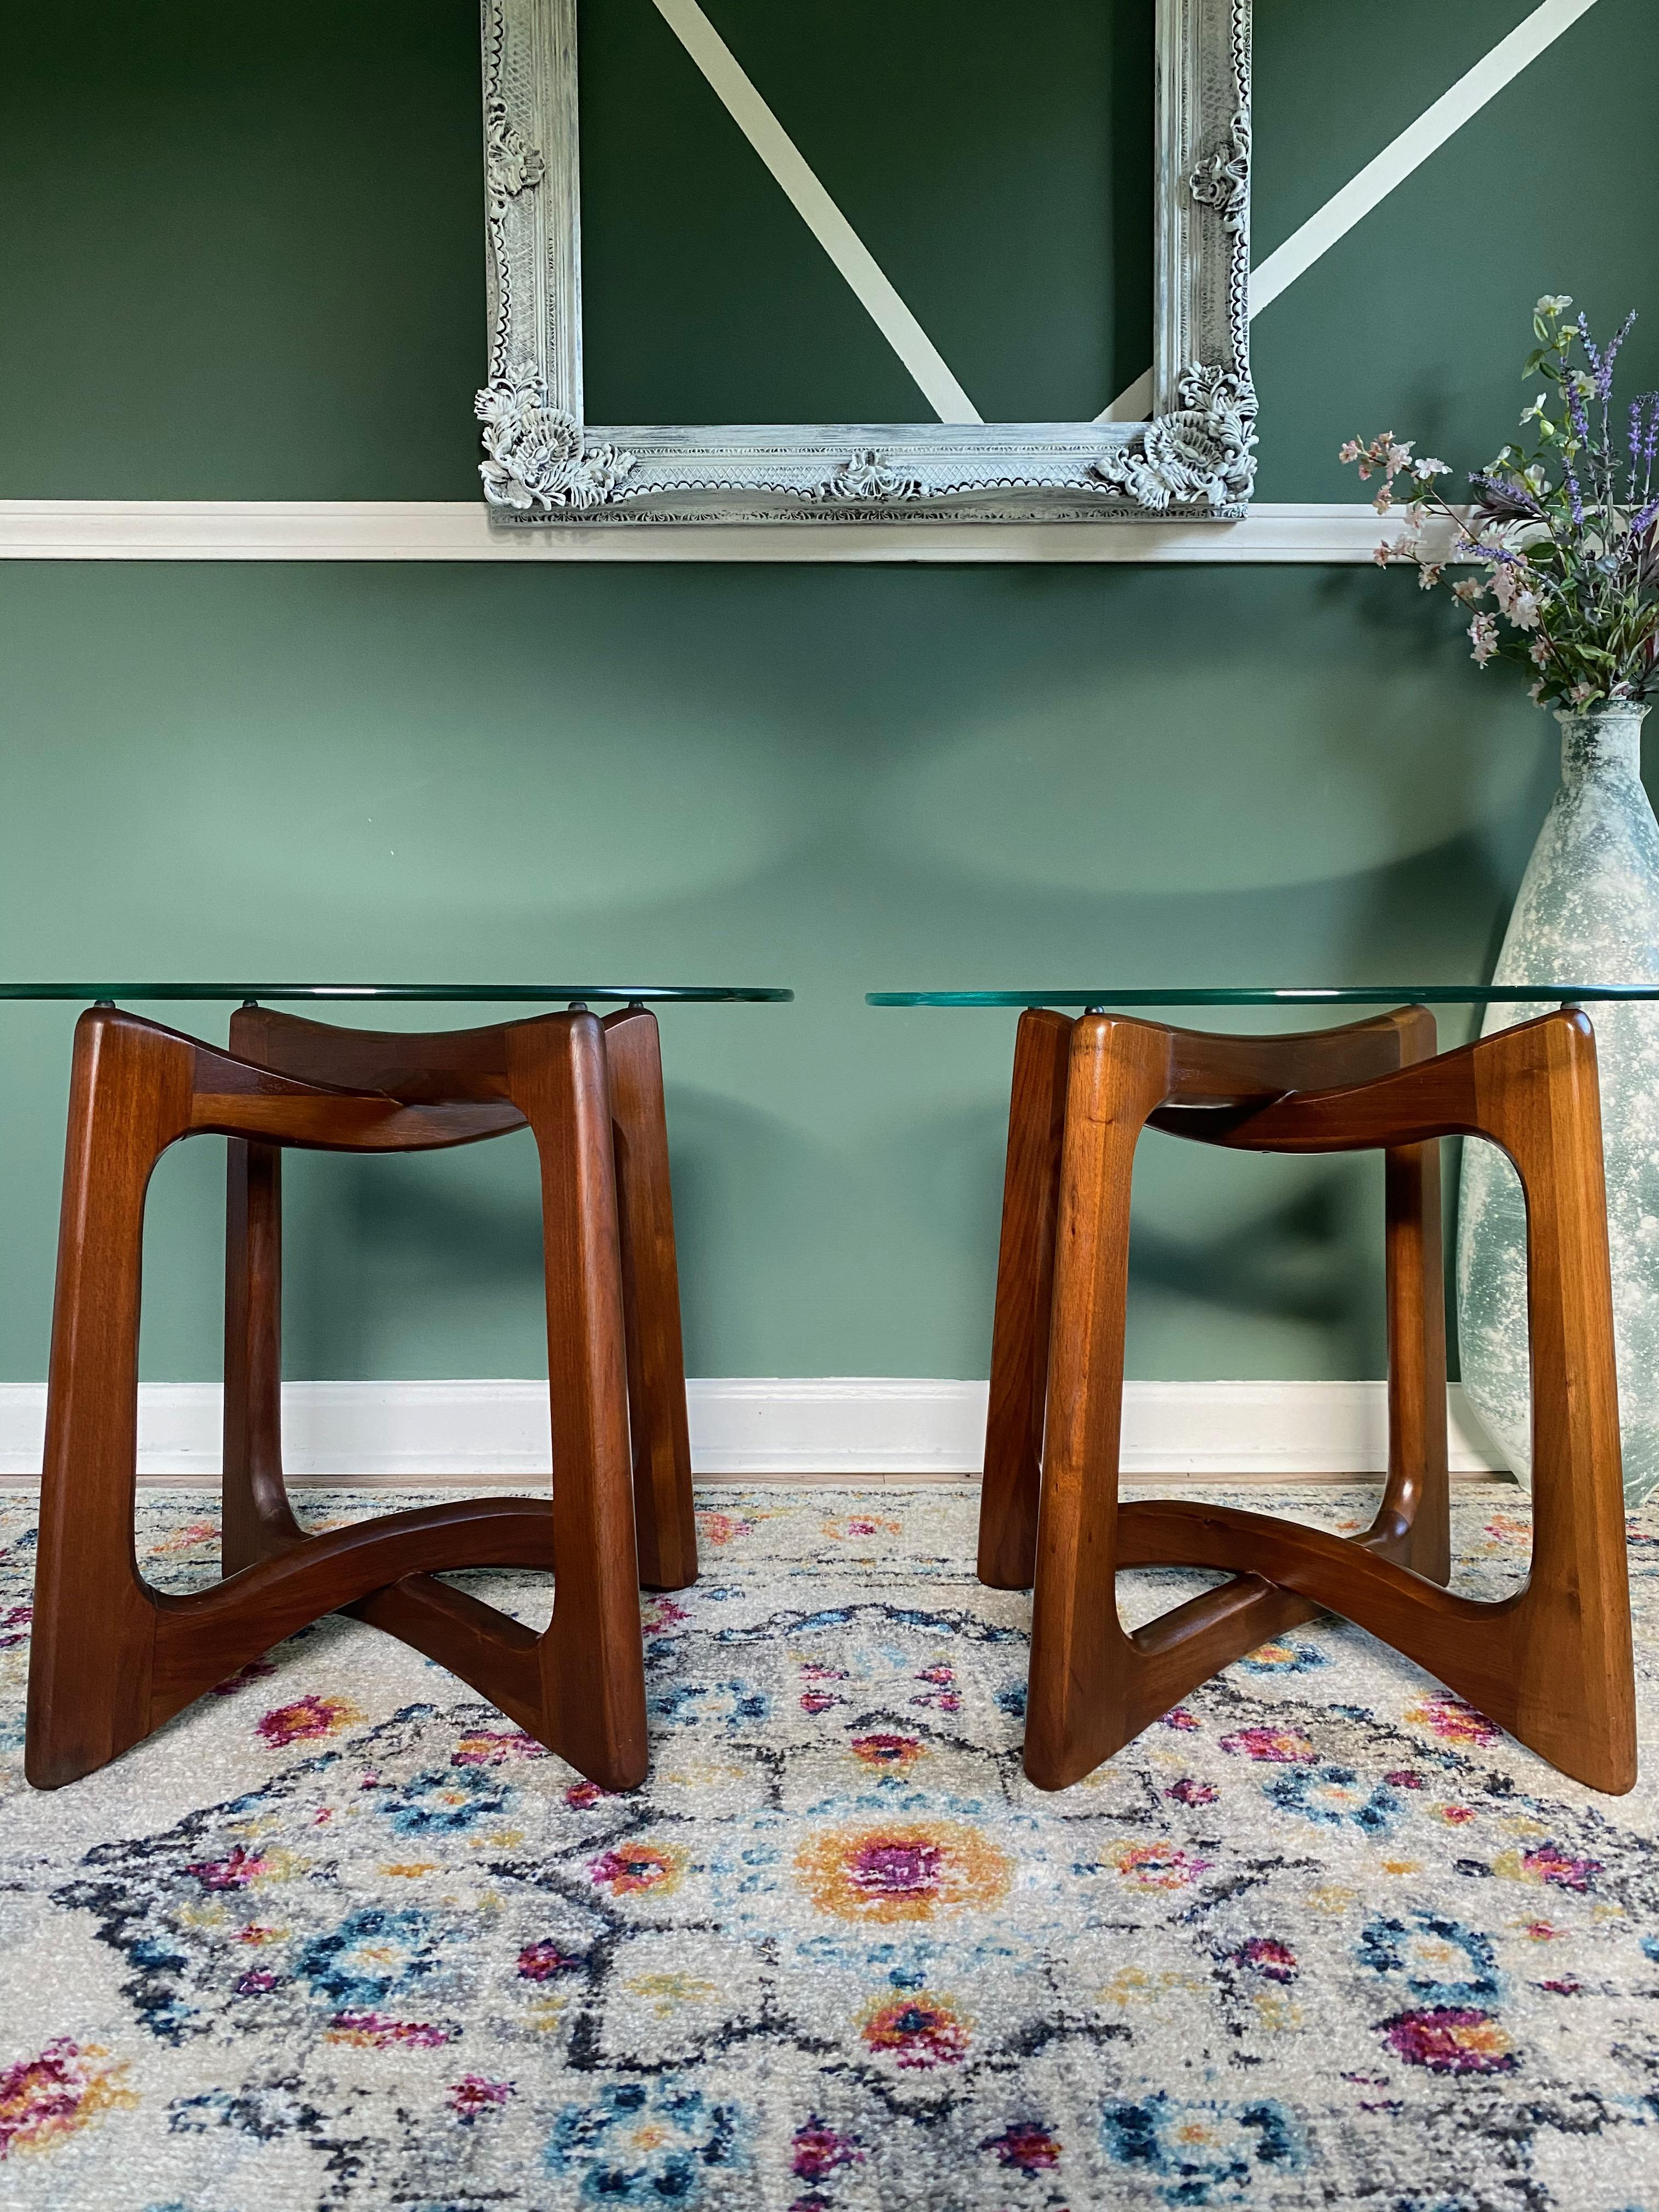 Beautiful pair of vintage 1960s modern tables designed by Adrian Pearsall for Craft Associates. Sculptural bases formed with interlocking open forms in solid walnut with round glass tops. Glass tops are removable. Marvelous pieces to have as end